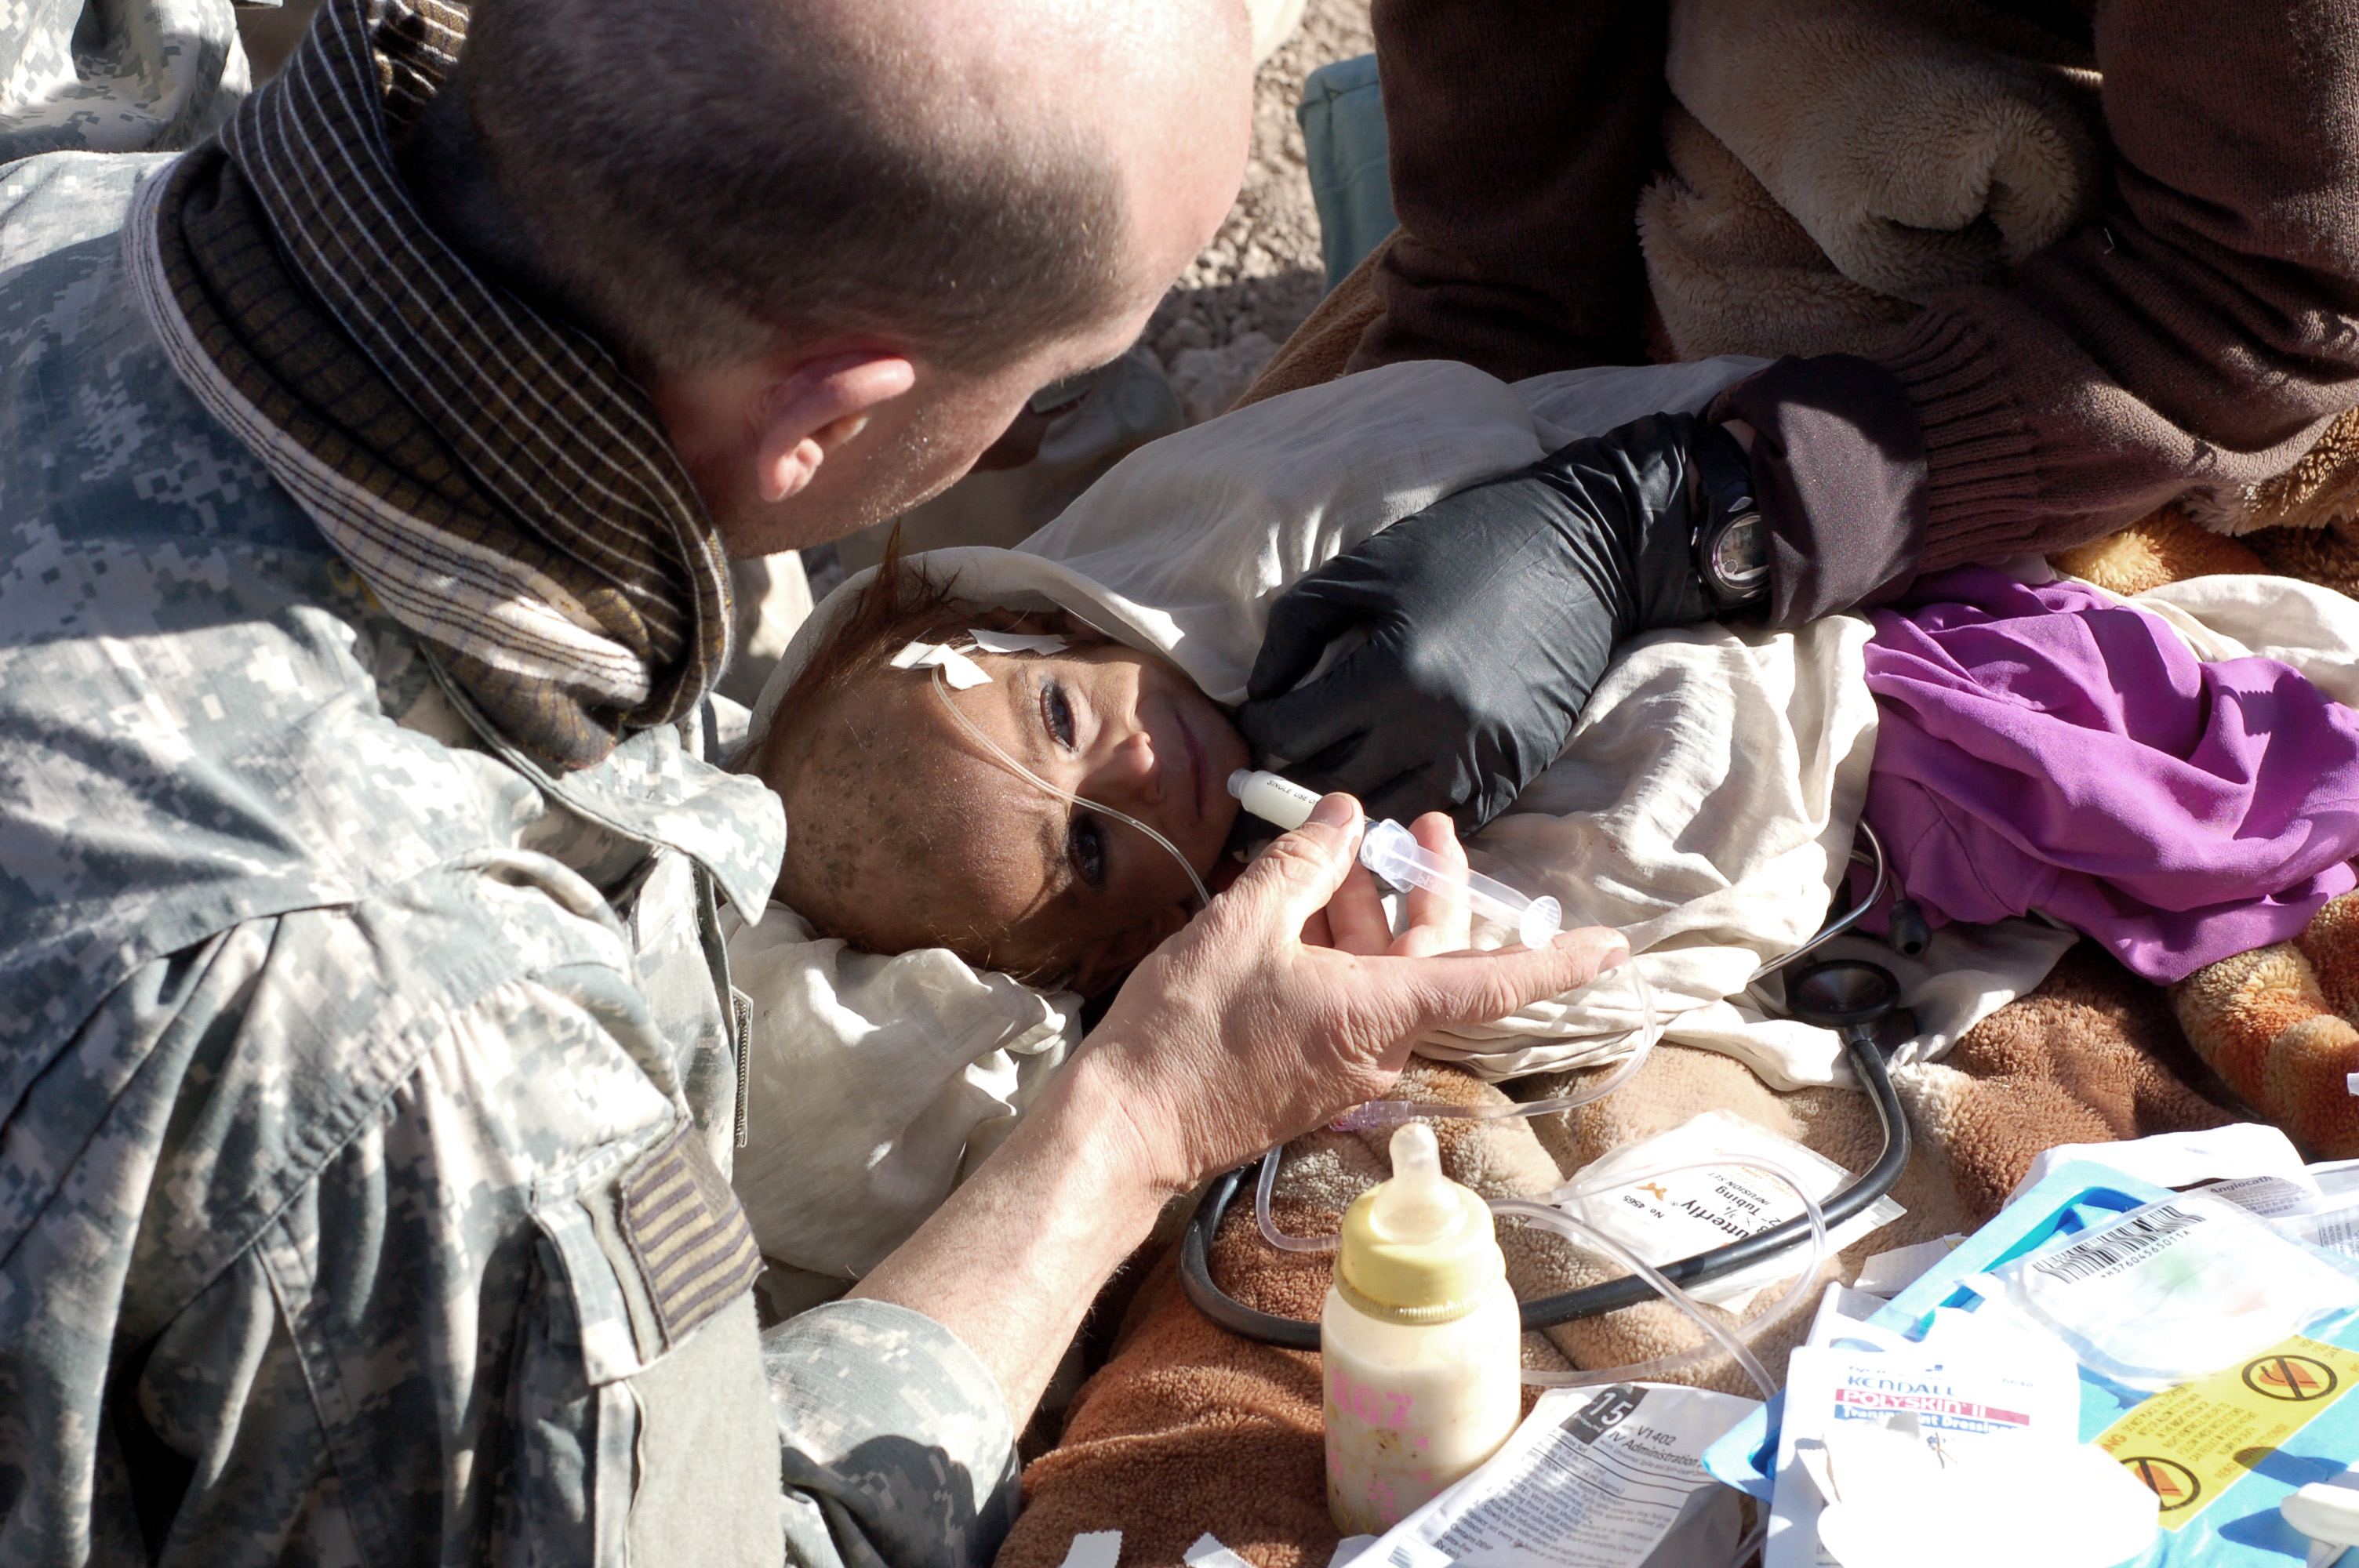 A U.S. Army medic tries to feed an 18-month gold Afghan girl using a syringe. She weighs approximately 14 pounds and is too weak to eat. 